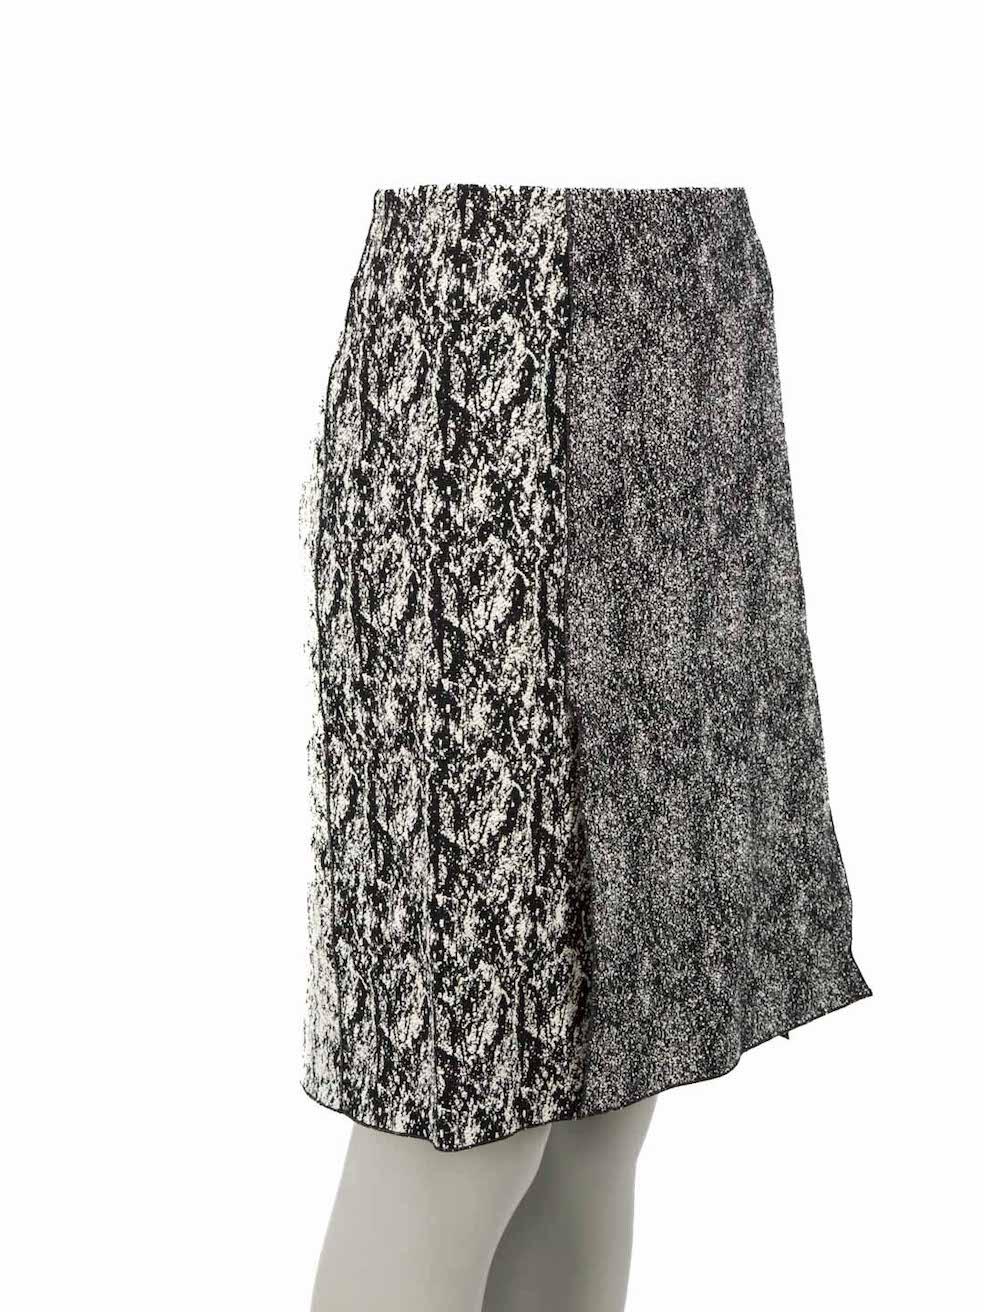 CONDITION is Good. Minor wear to the skirt is evident. Light wear to fabric with negligible discolouration of some white yarns and brand label on this used C√©line designer resale item 
 
 Details:
 Black and white
 Cotton
 Skirt
 Woven cord